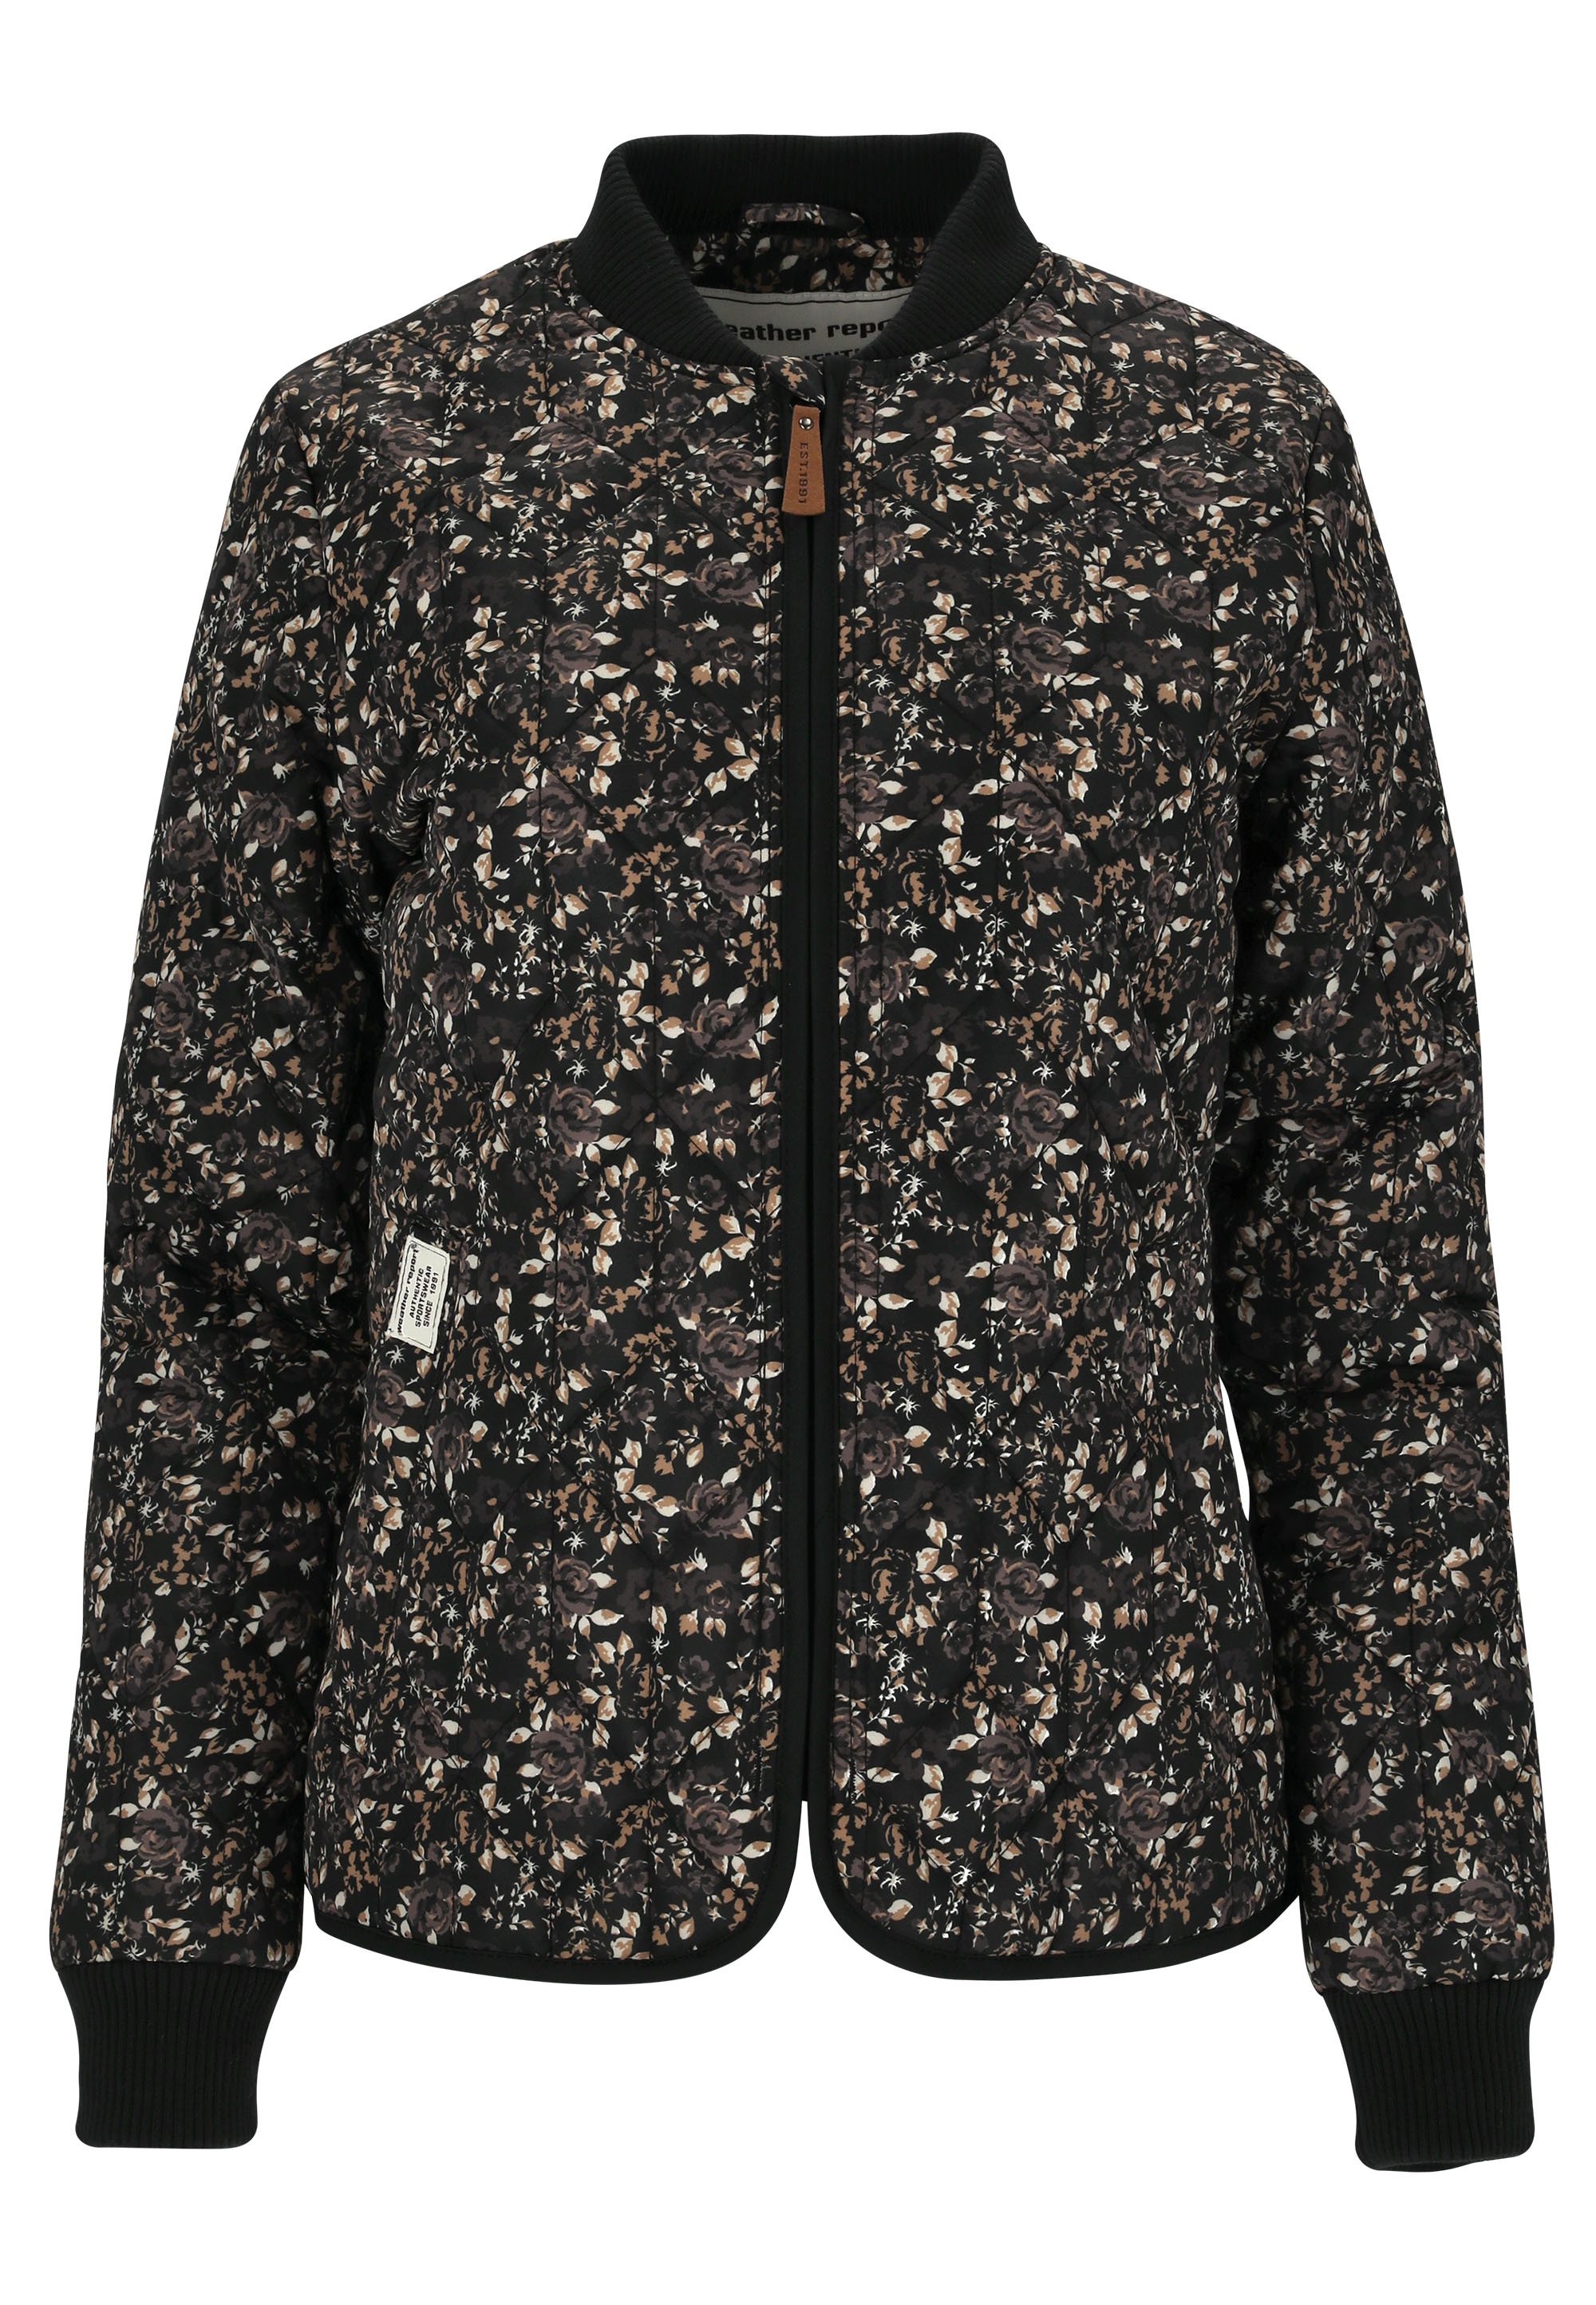 »Floral«, REPORT WEATHER Outdoorjacke mit online Allover-Muster floralem